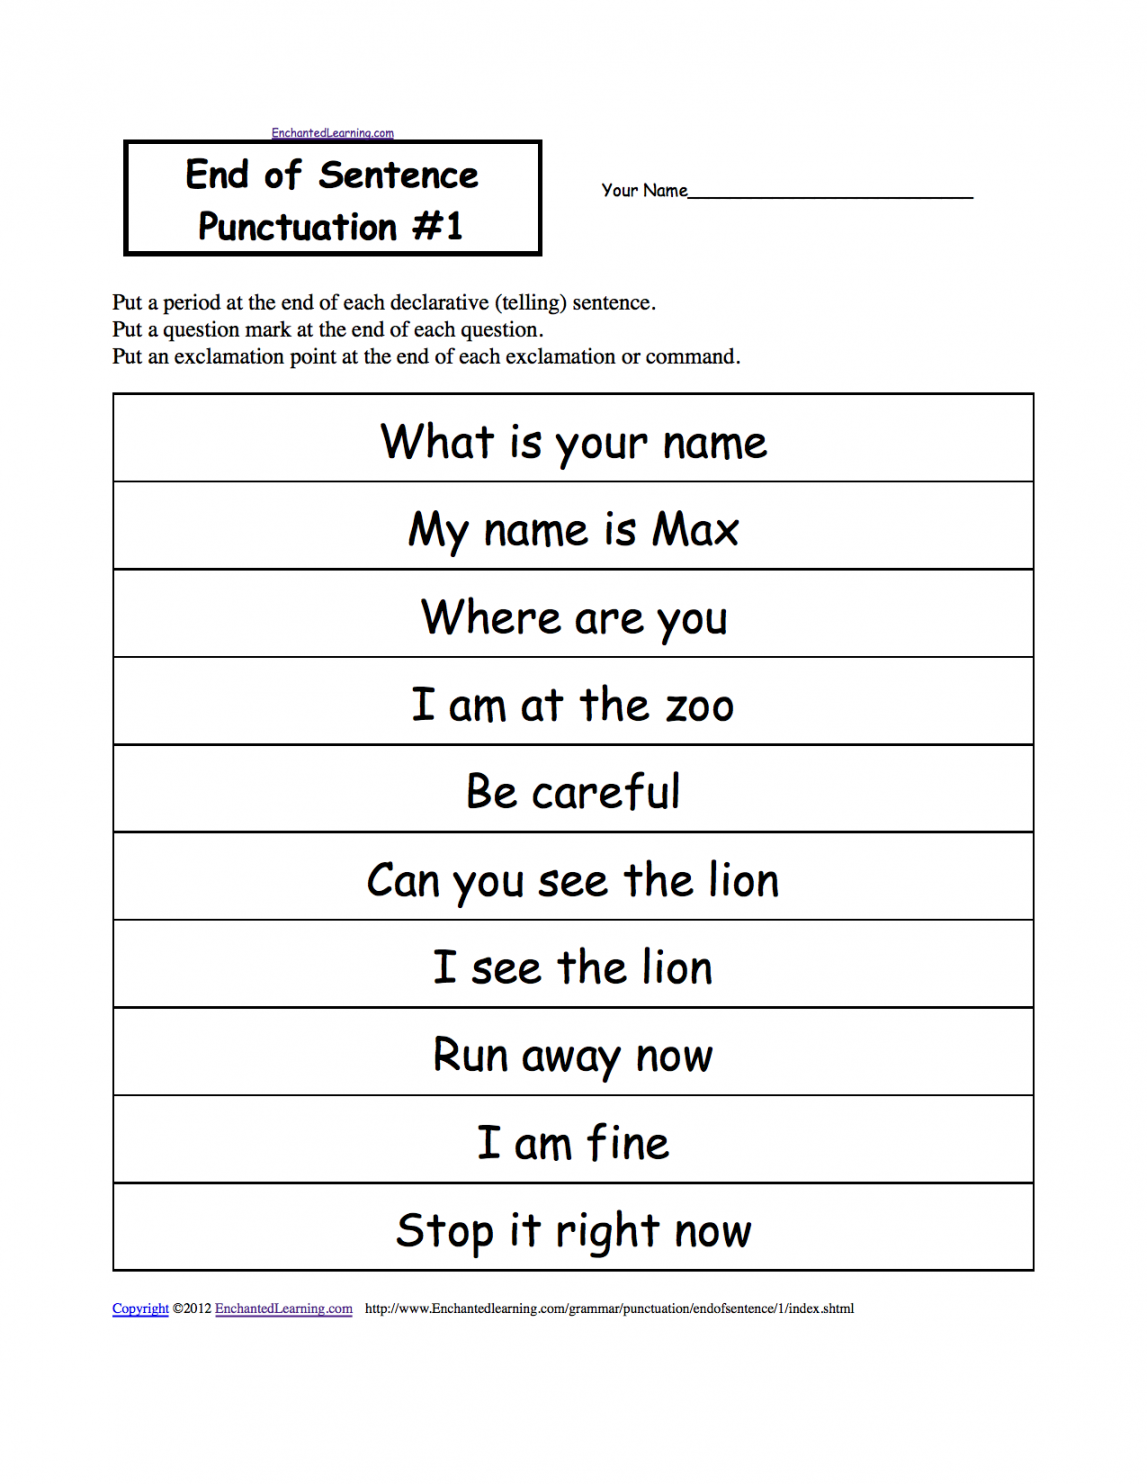 End of Sentence Punctuation, Printable Worksheets